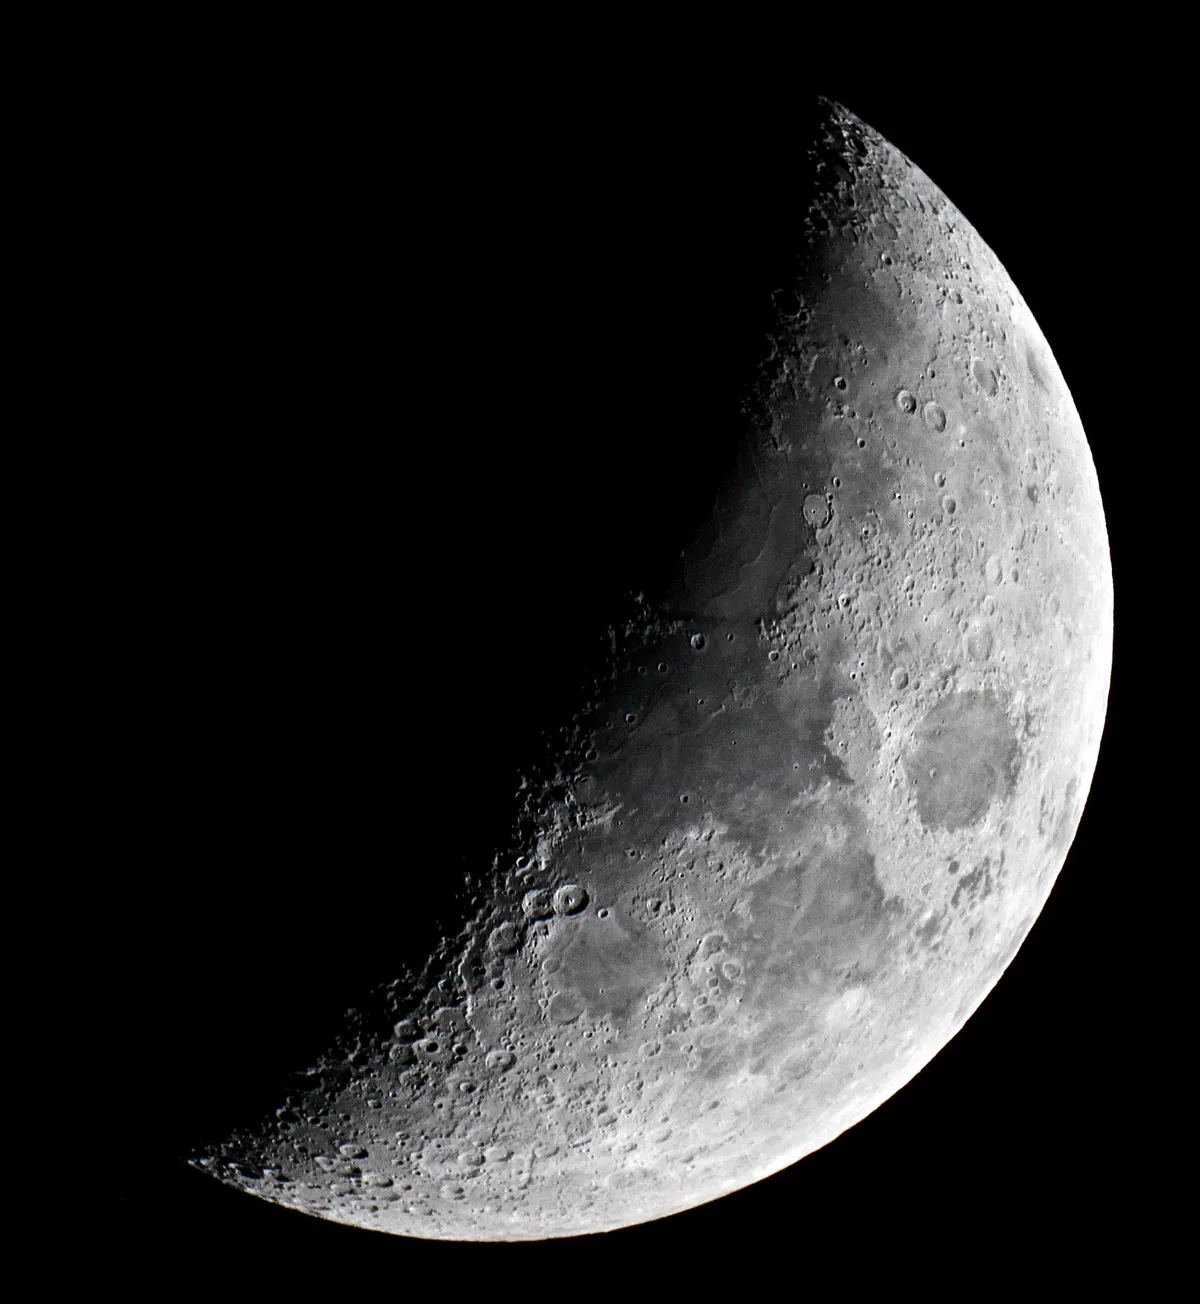 Lovely Luna by Sarah & Simon Fisher, Bromsgrove, Worcestershire. Equipment: Canon 600D, Maksutov 127mm.